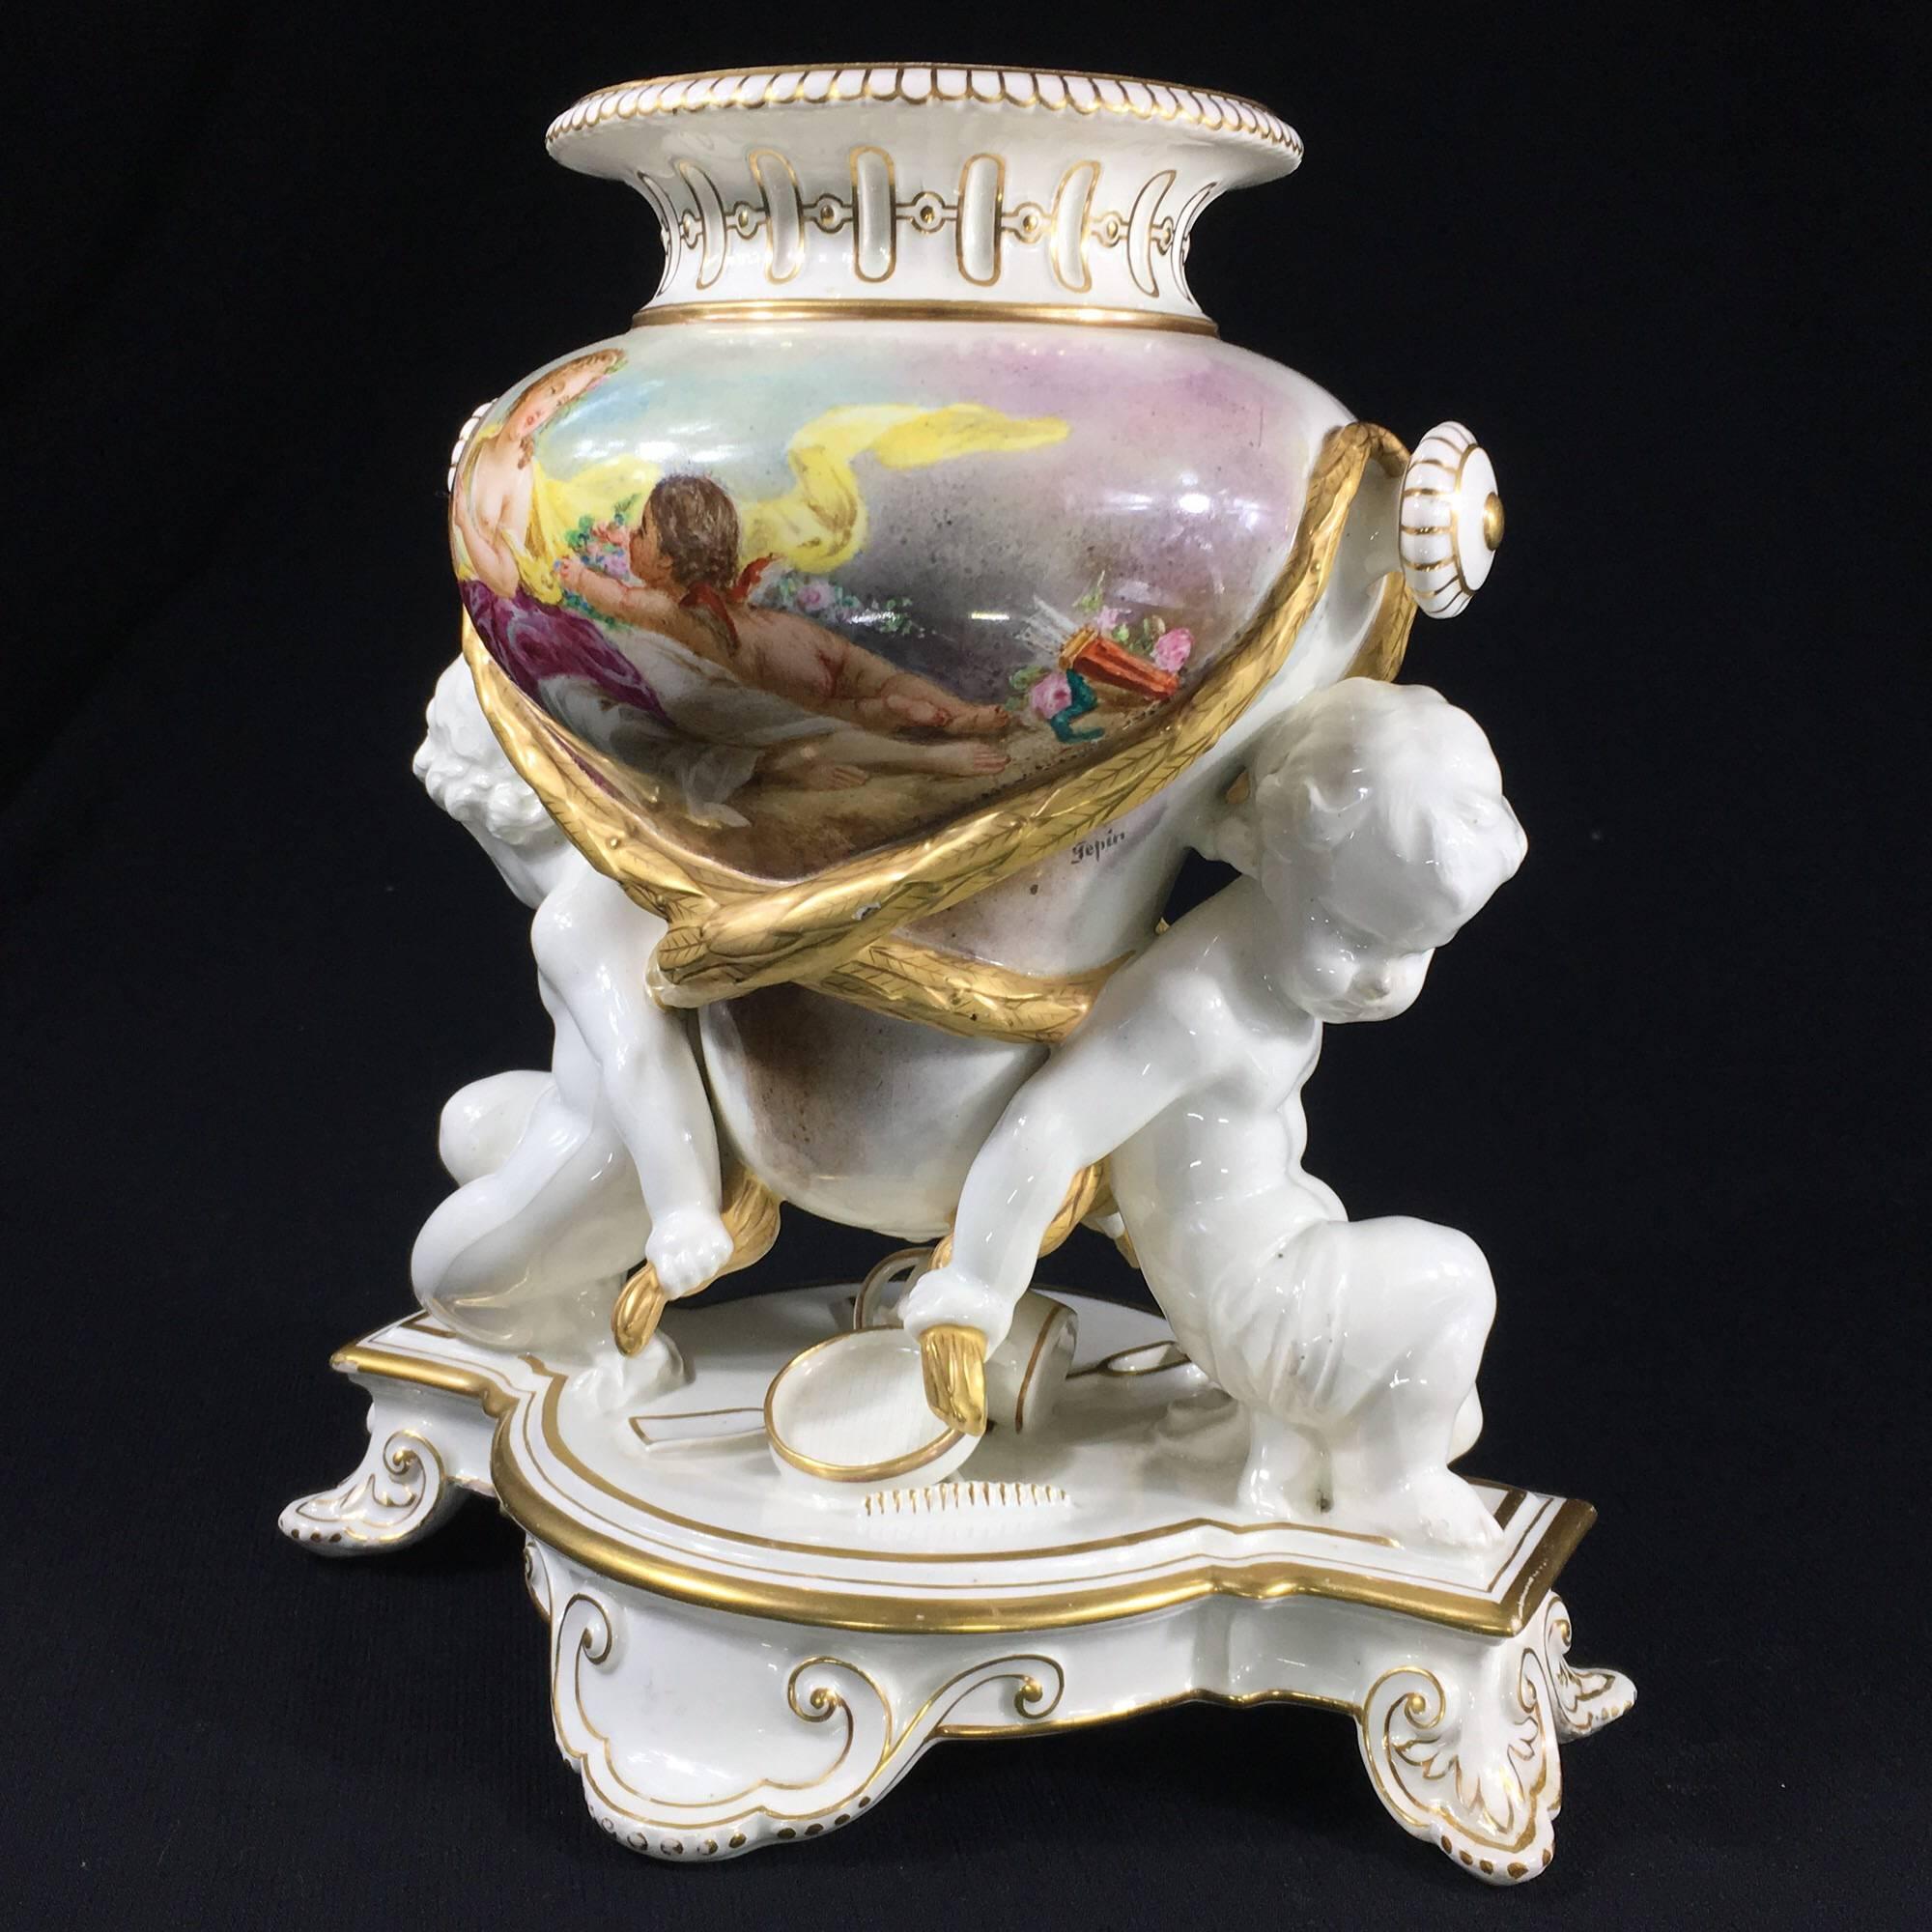 Impressive Wedgwood Queensware 'Trentham' vase, the central amphora form supported by two cherubs, a scattering of gardening tools modelled beneath, the whole on a shaped base with scroll feet, the vase painted to either side in the Continental